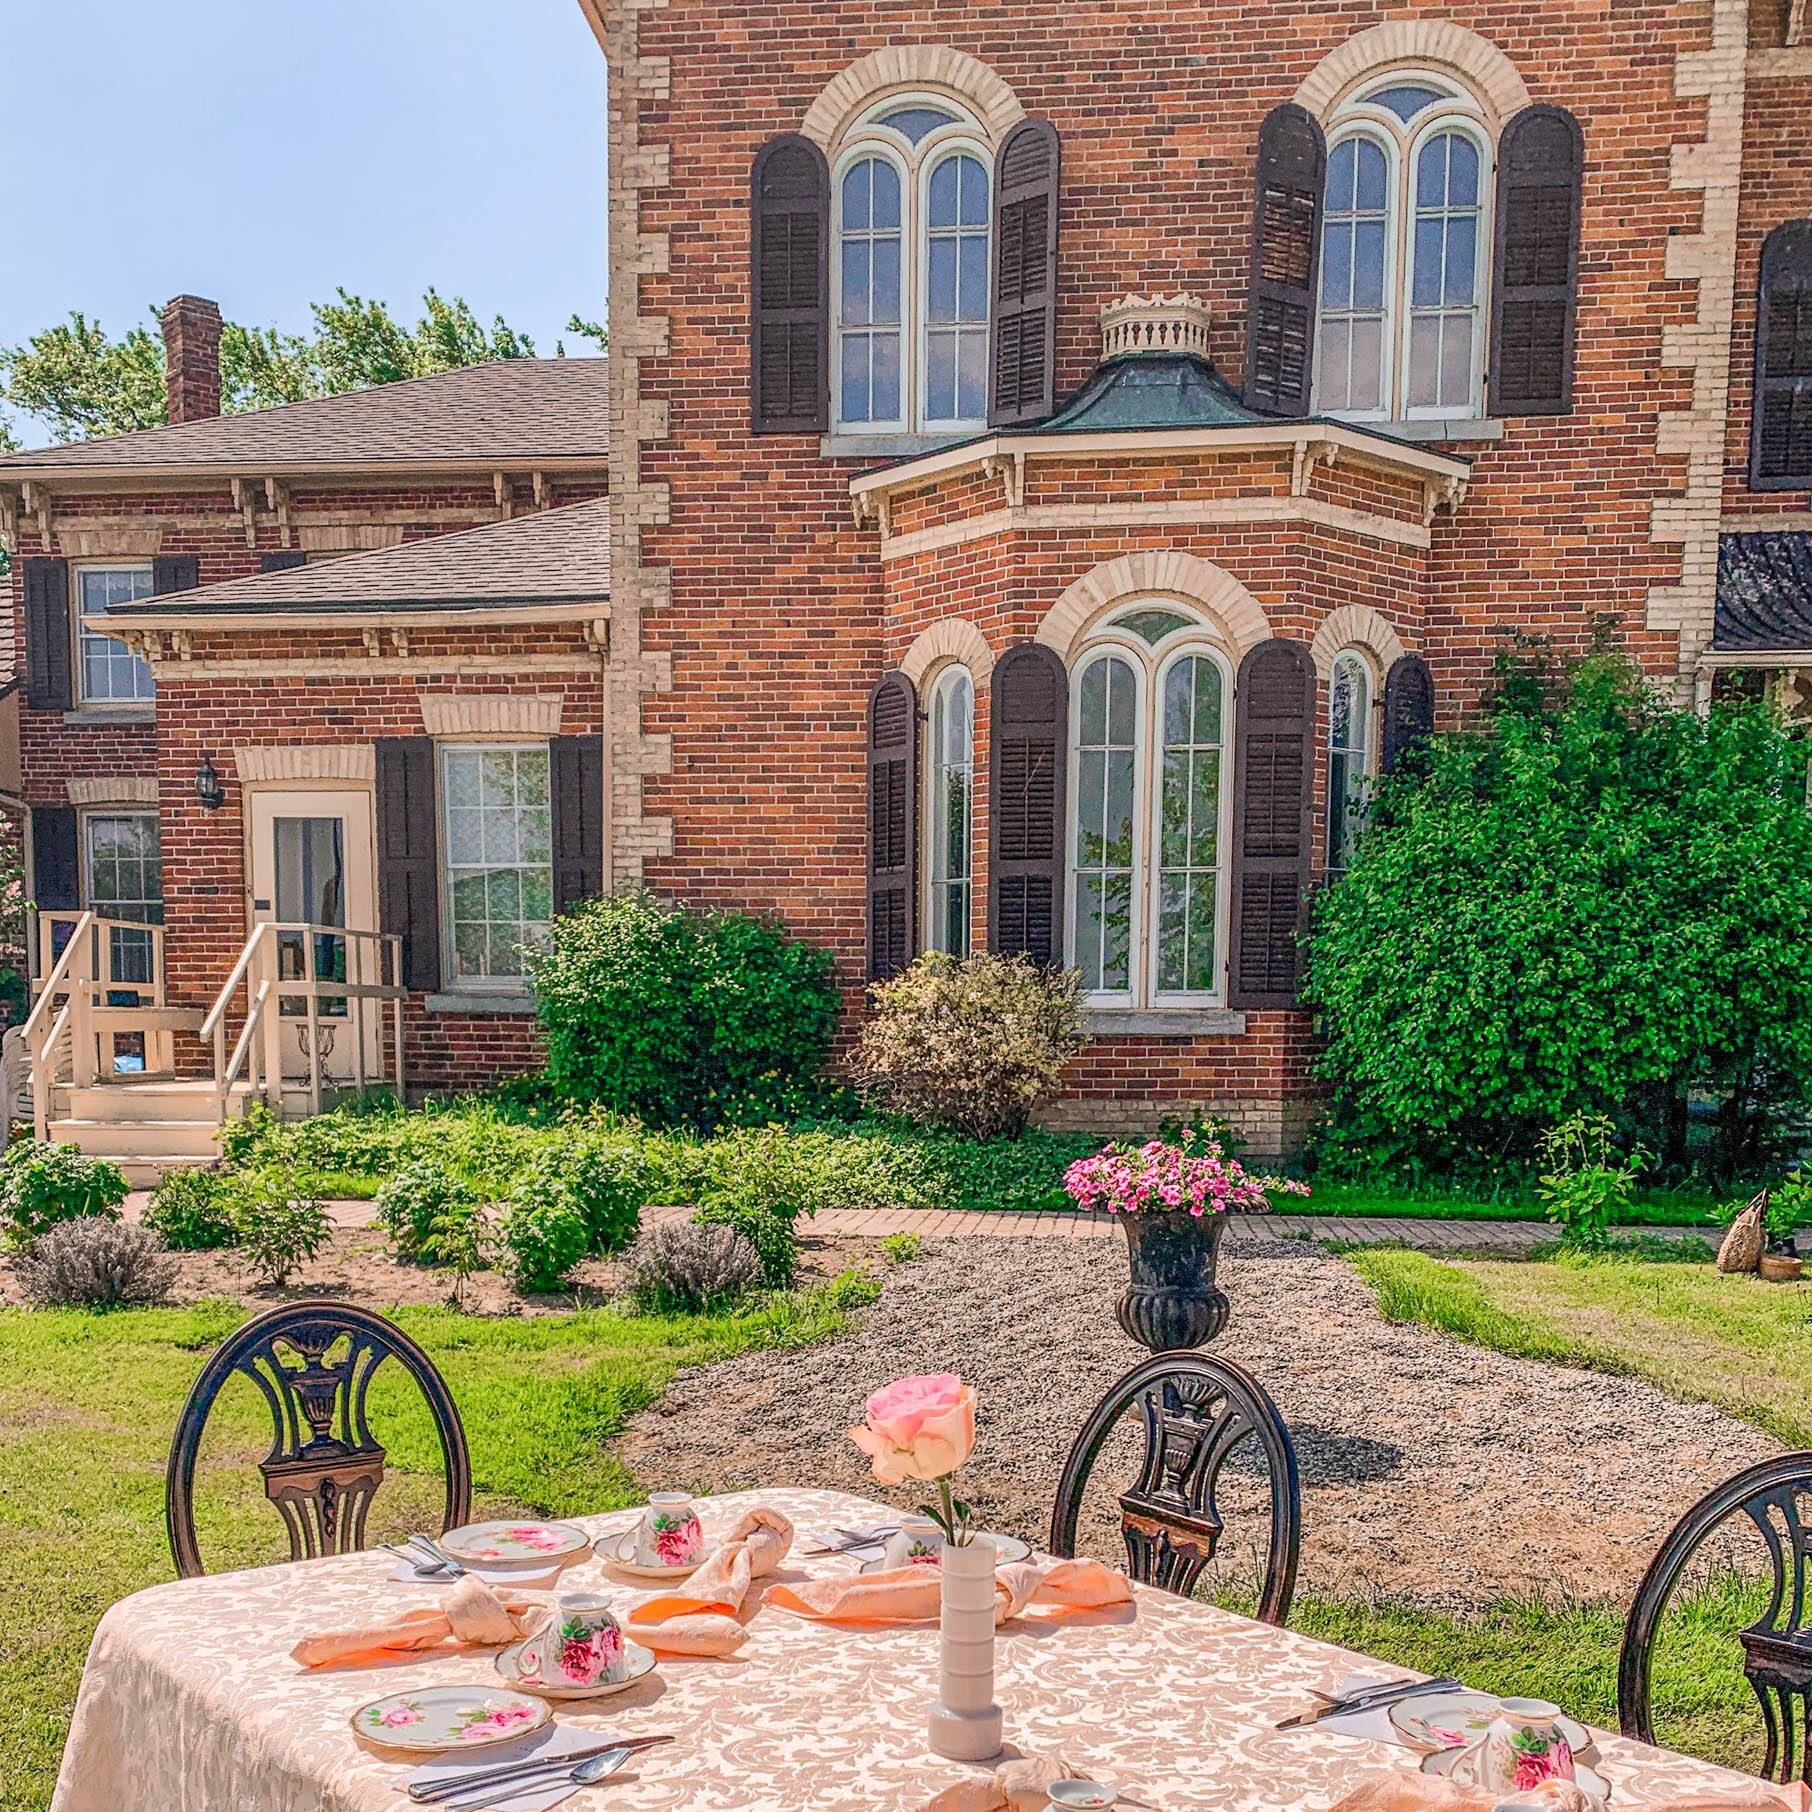 Cottonwood Mansion Summer Events ☀
We have a number of exciting events coming up this summer, and we'd like to share them with you!

June 10th, 2023 - Queen's Commemorative Afternoon Tea &amp; Dressage Show
July 28th, 2023 - Dinner in the Countryside